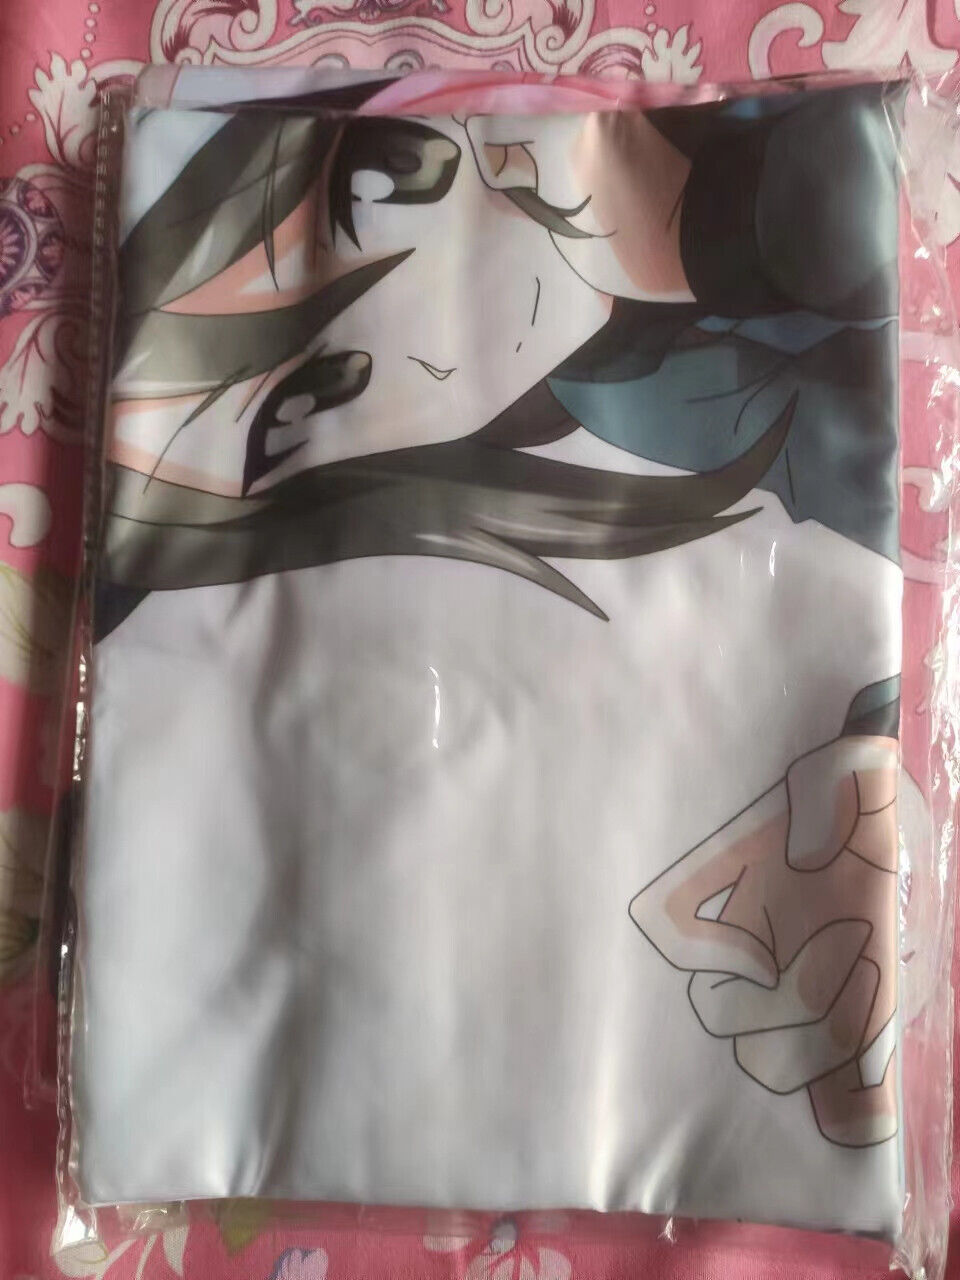 Huge New 150x50cm Mika GIRLS und PANZER Anime Body Pillow Cover Case Xmas Gift 08 on eBay